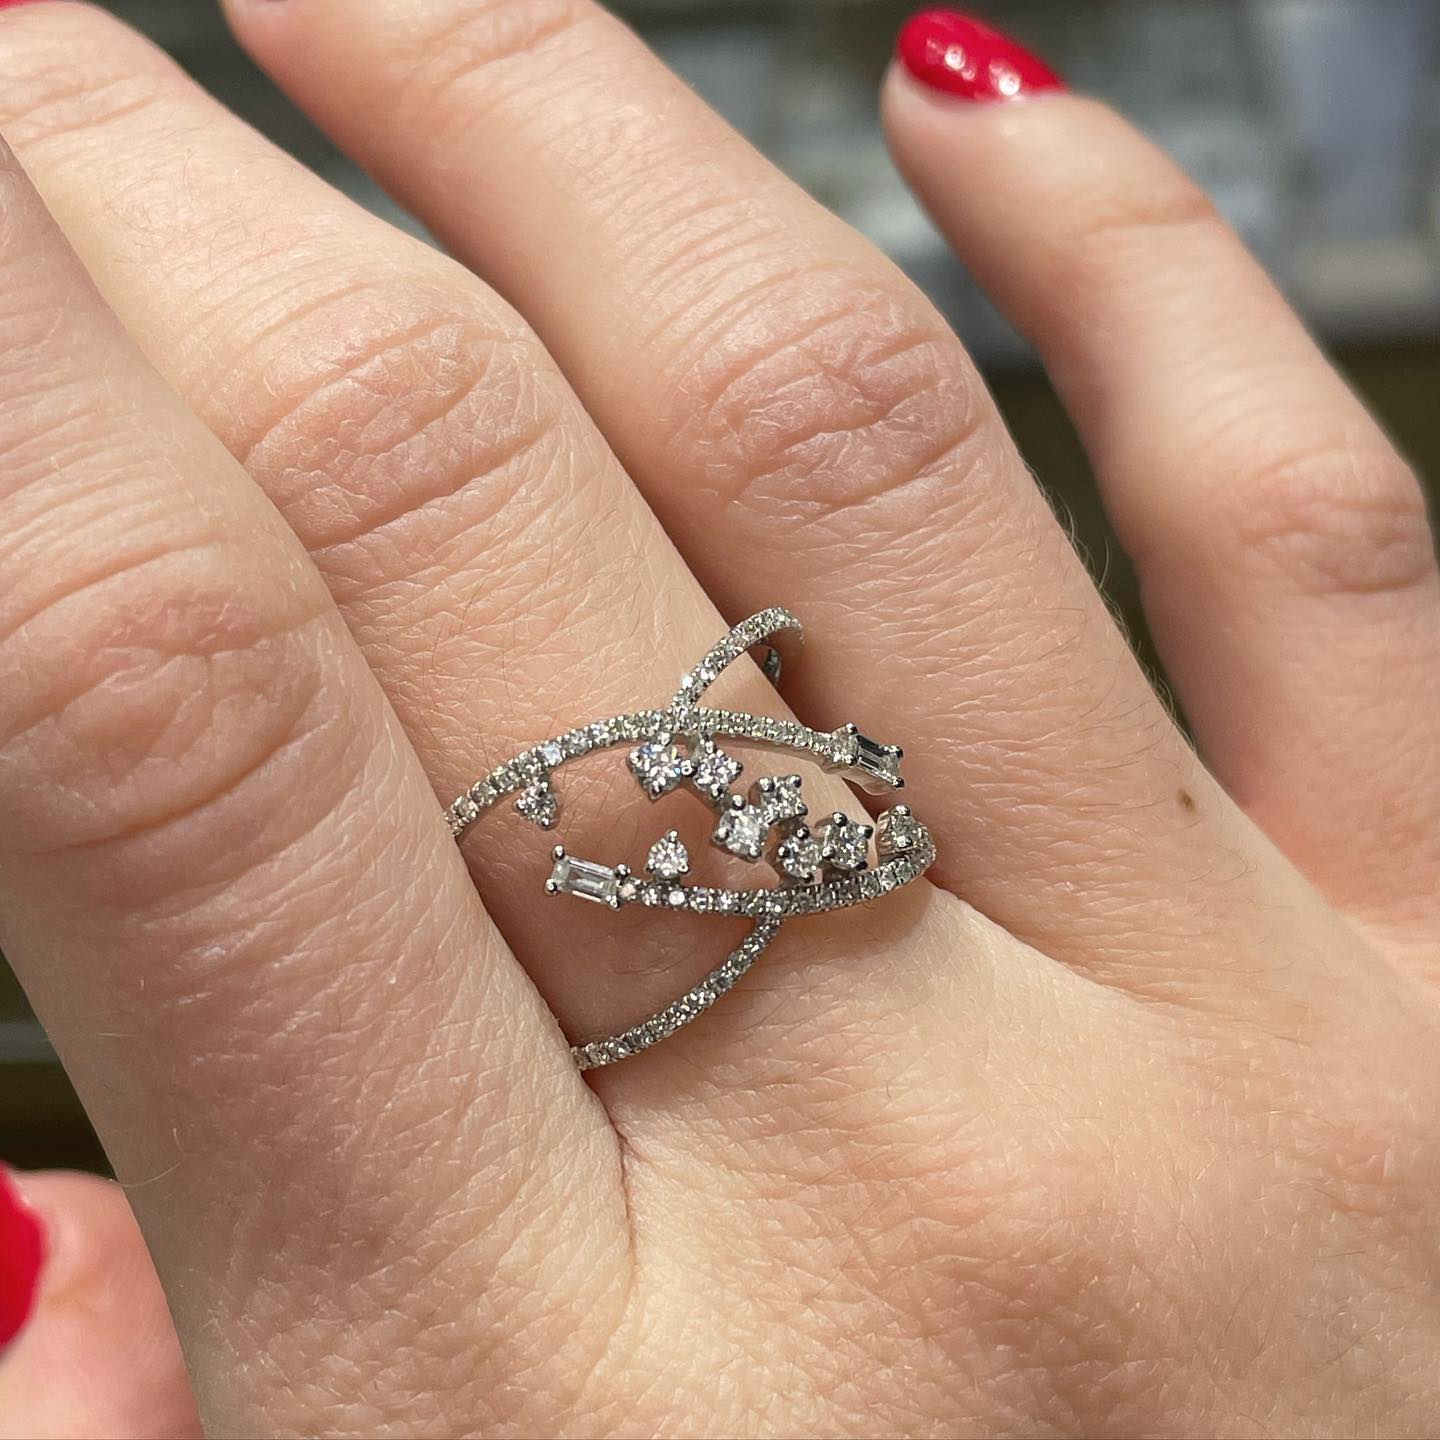 Silver diamond ring on a finger